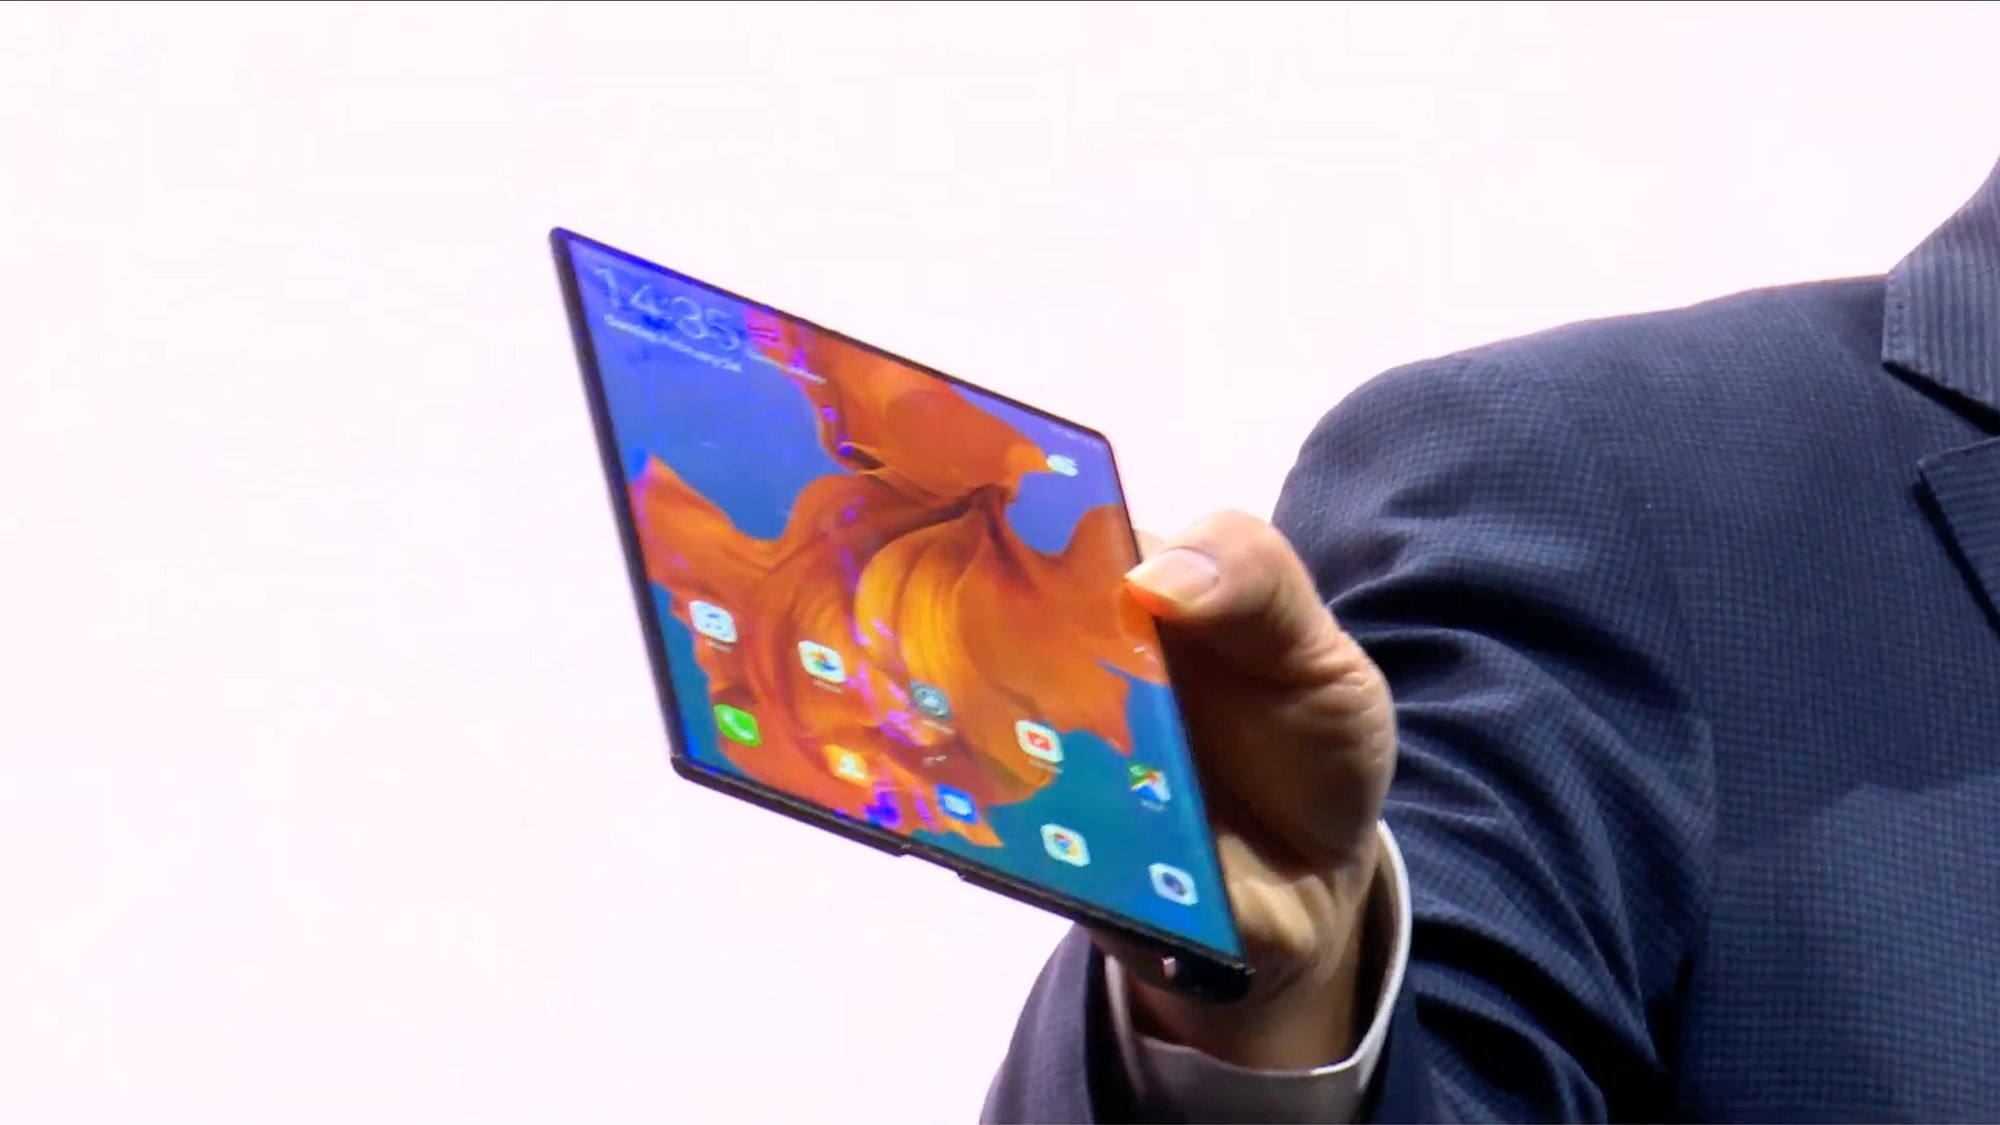 The full view display is an 8-inch screen when folded open.